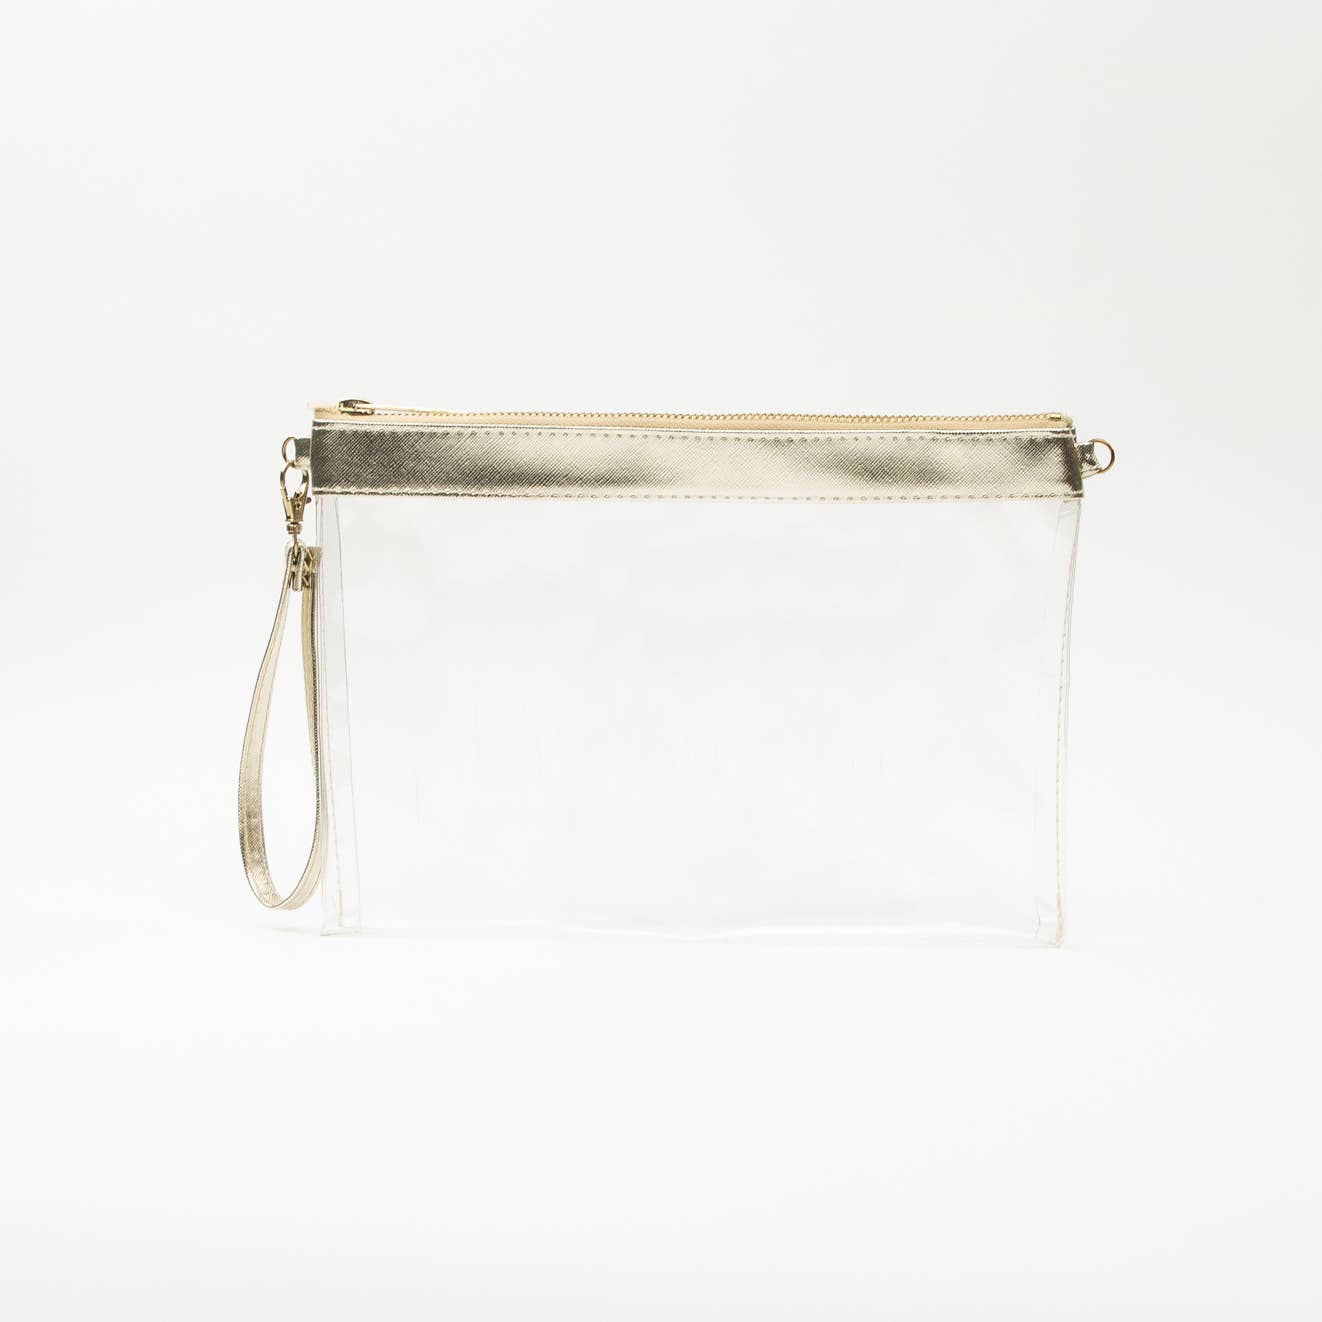 CLEAR TRAVEL BAG: GRAY